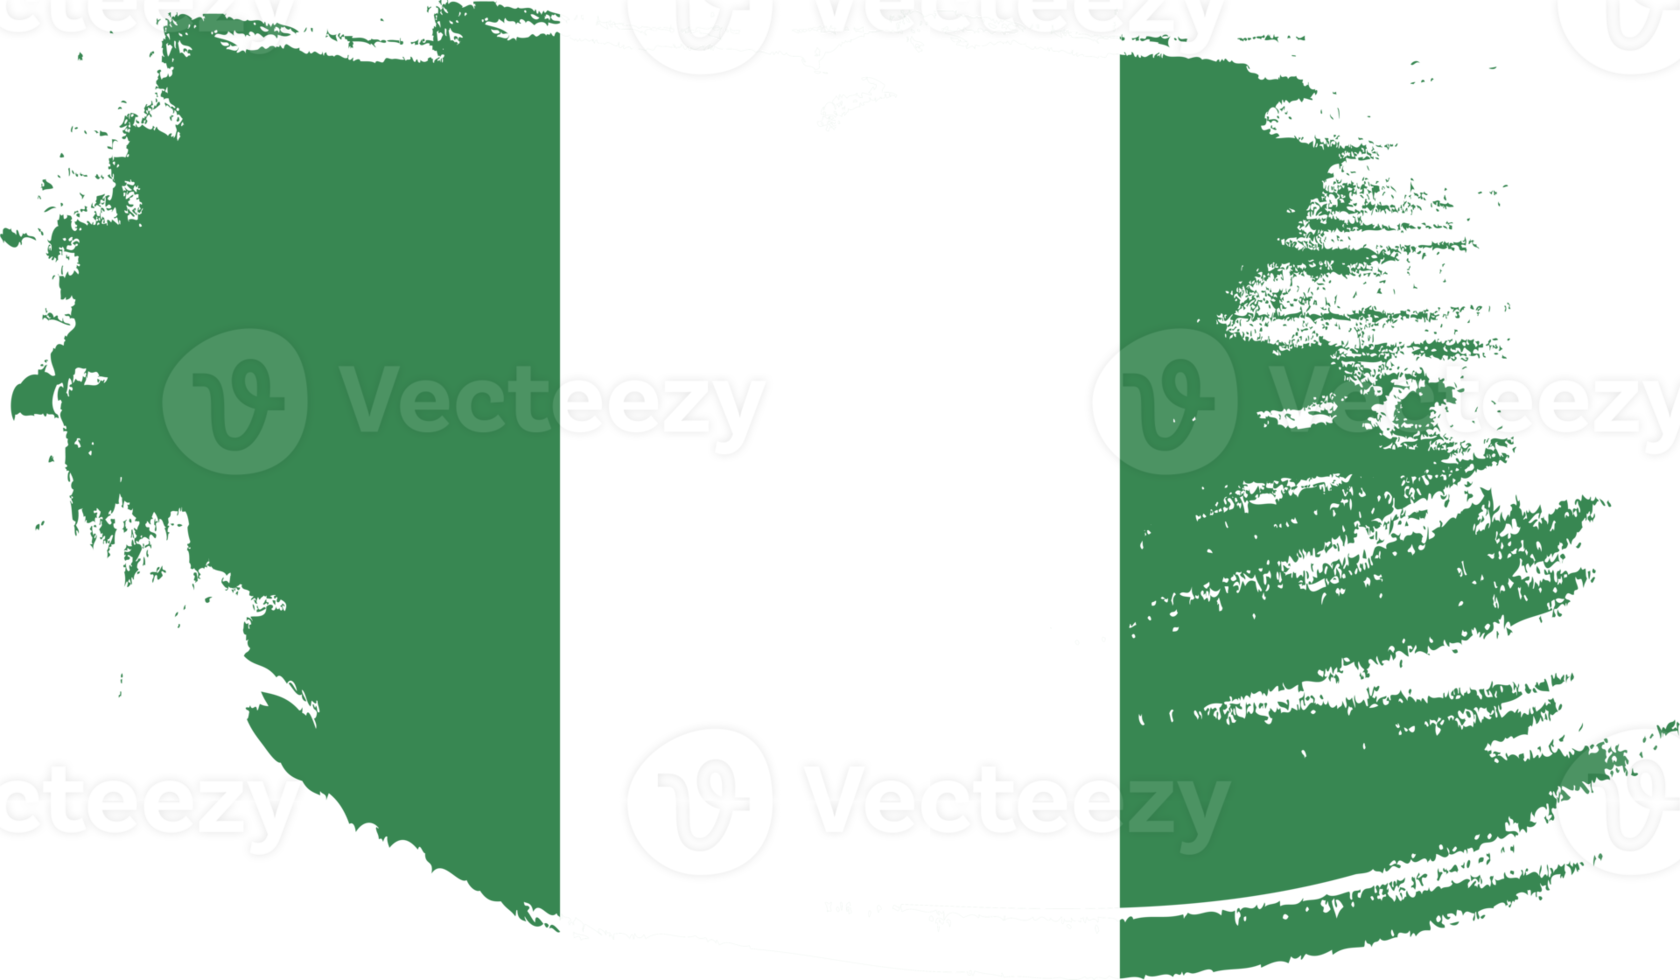 Nigeria flag with grunge texture png